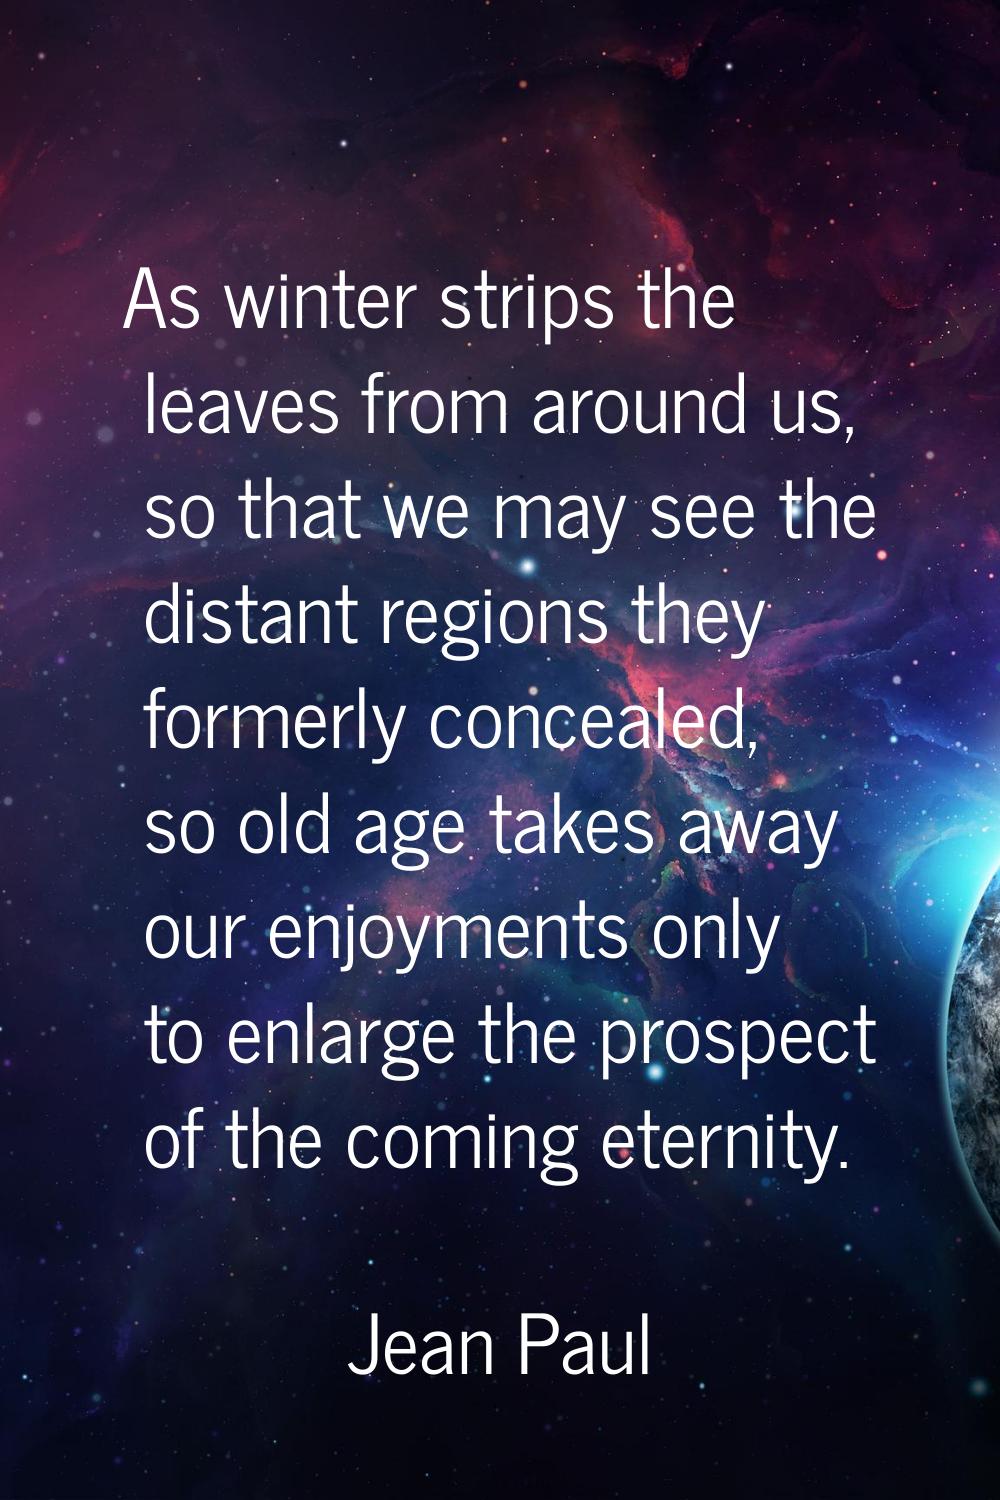 As winter strips the leaves from around us, so that we may see the distant regions they formerly co